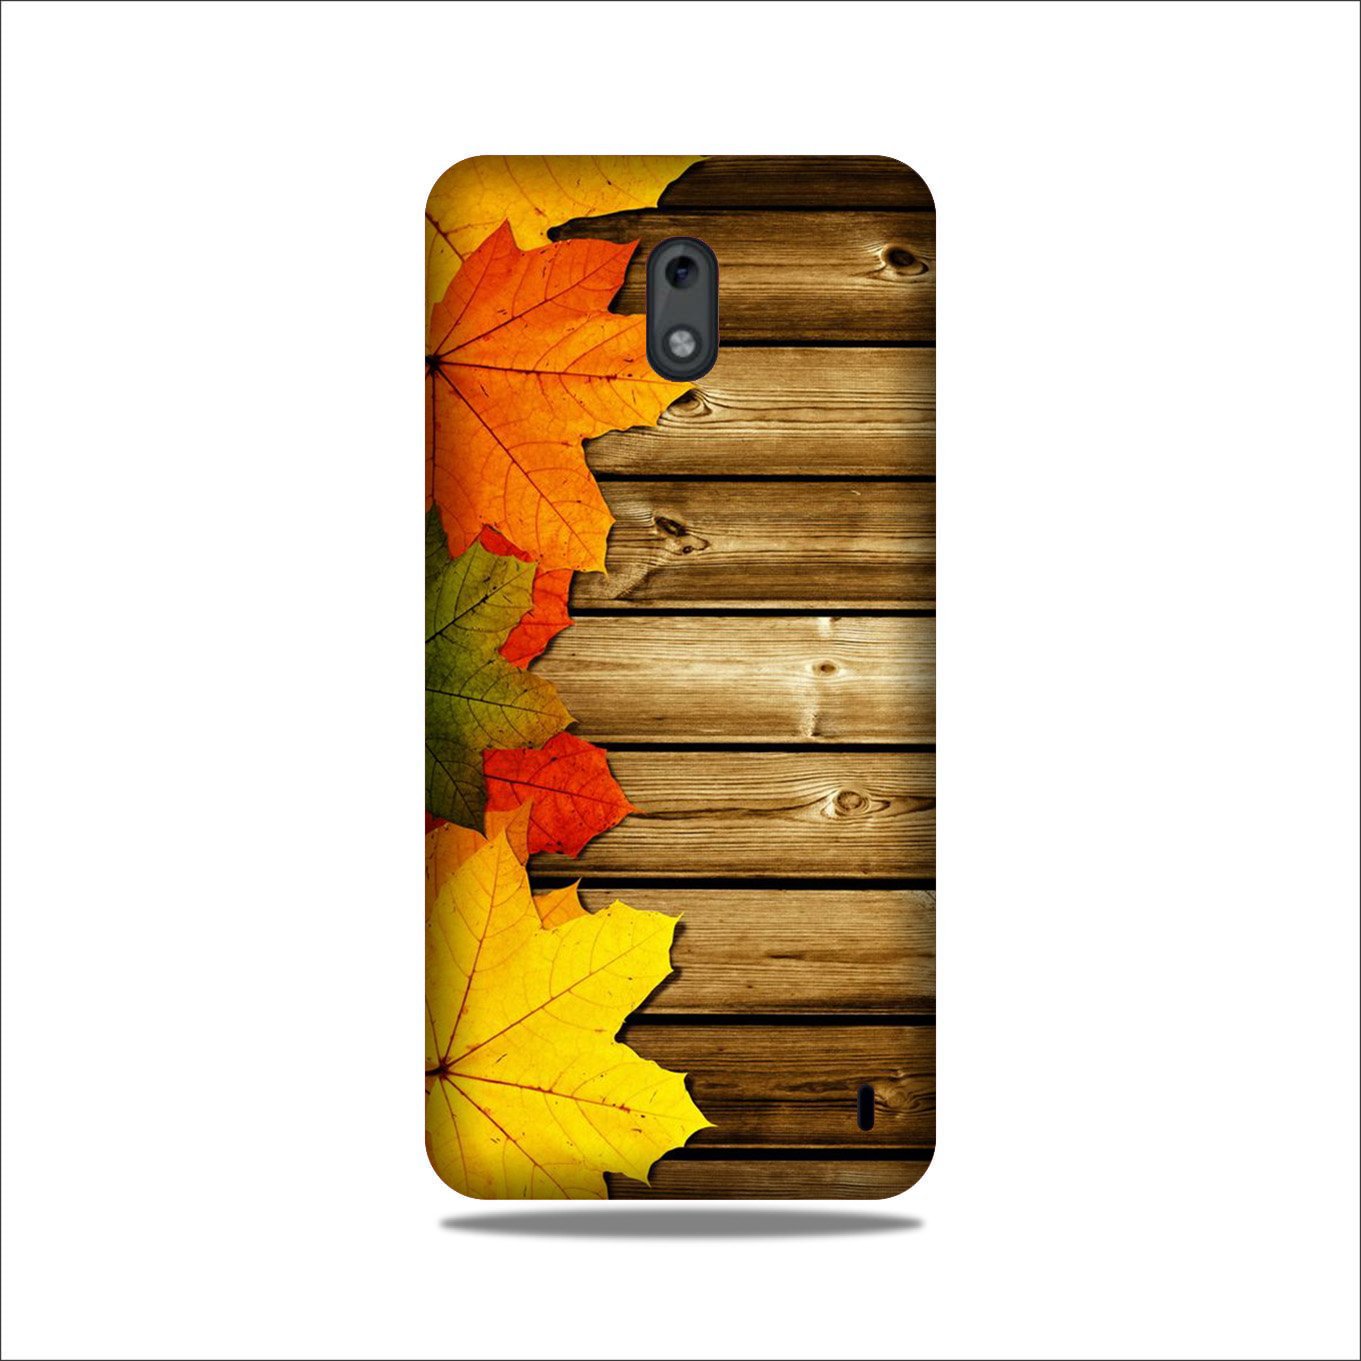 Wooden look3 Case for Nokia 3